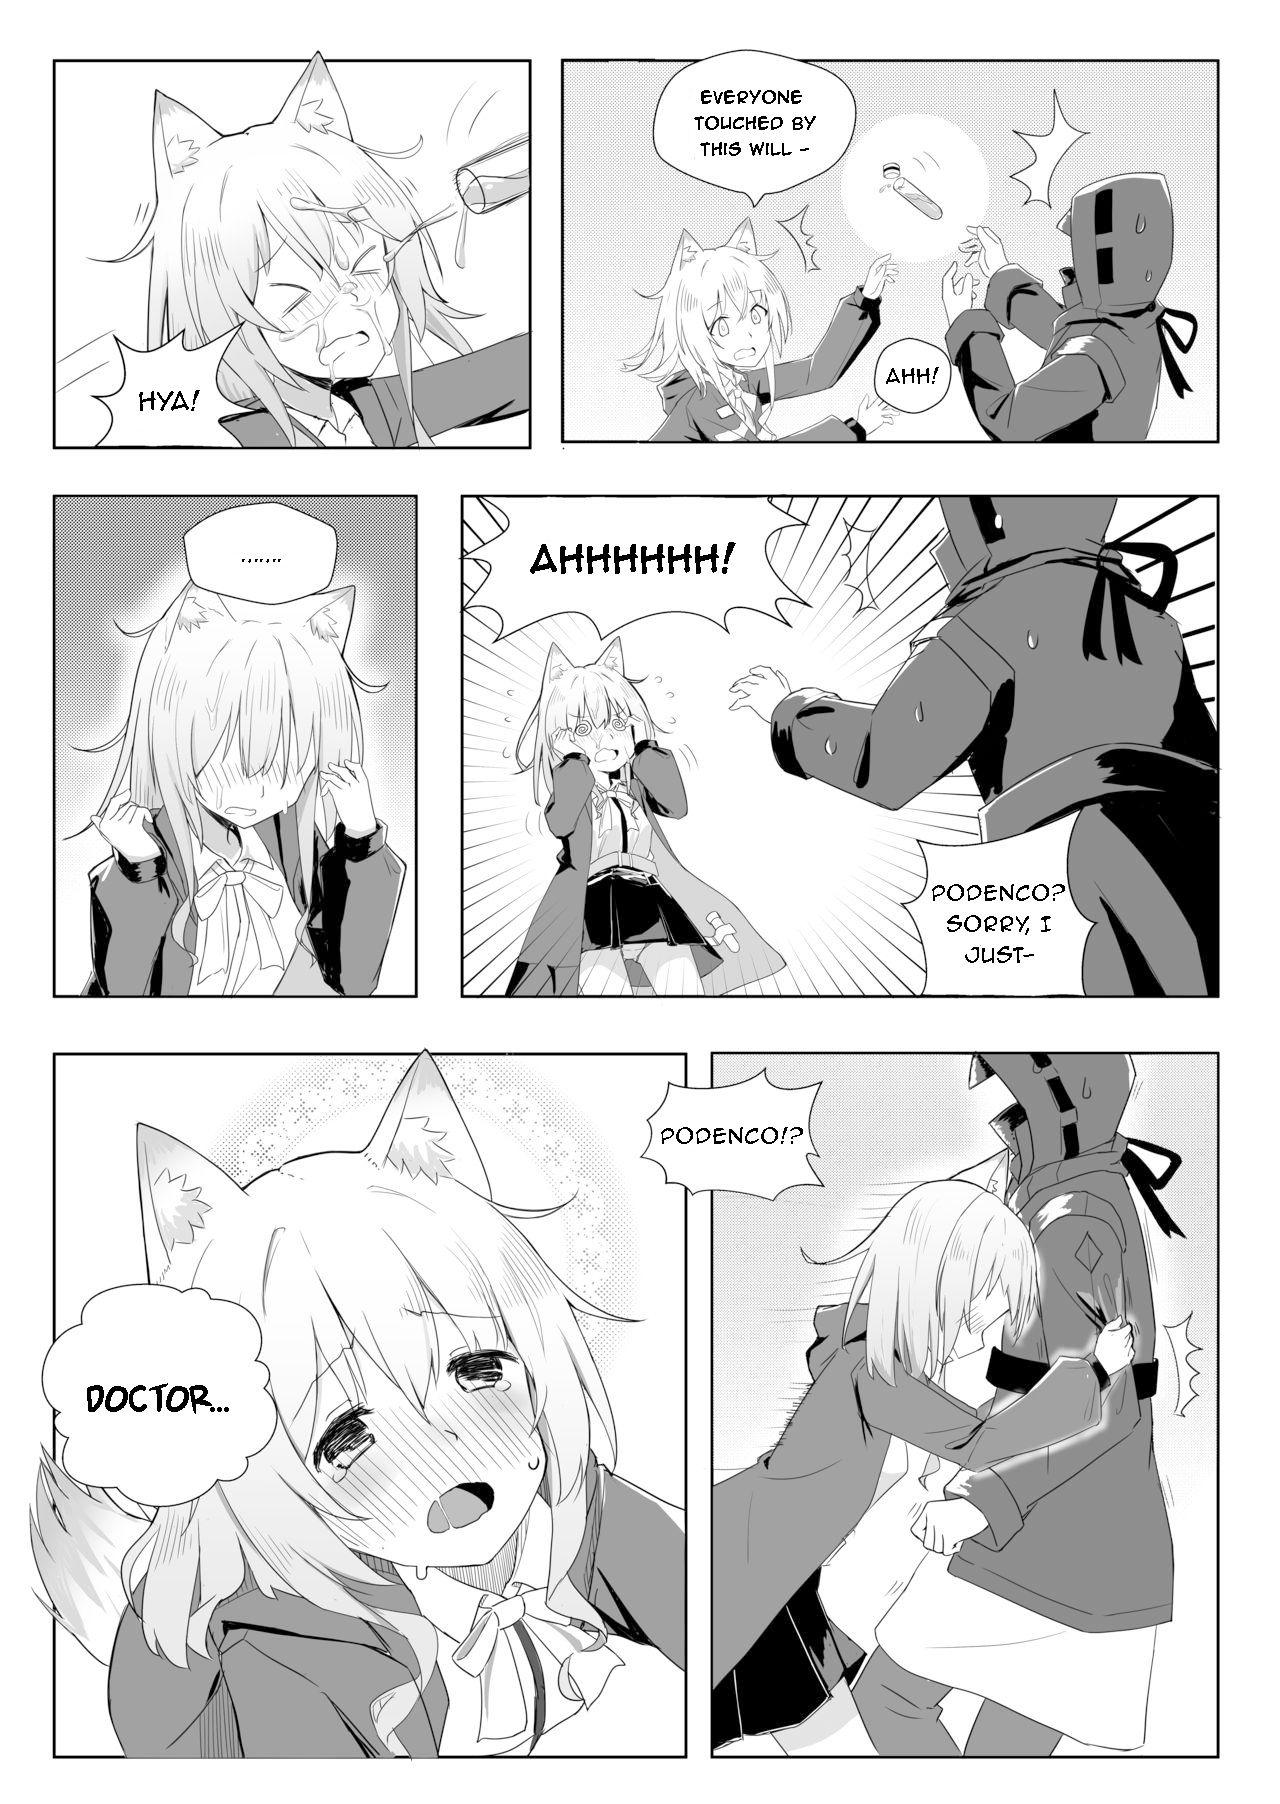 Daring Podenco in heat - Arknights Creampies - Page 4